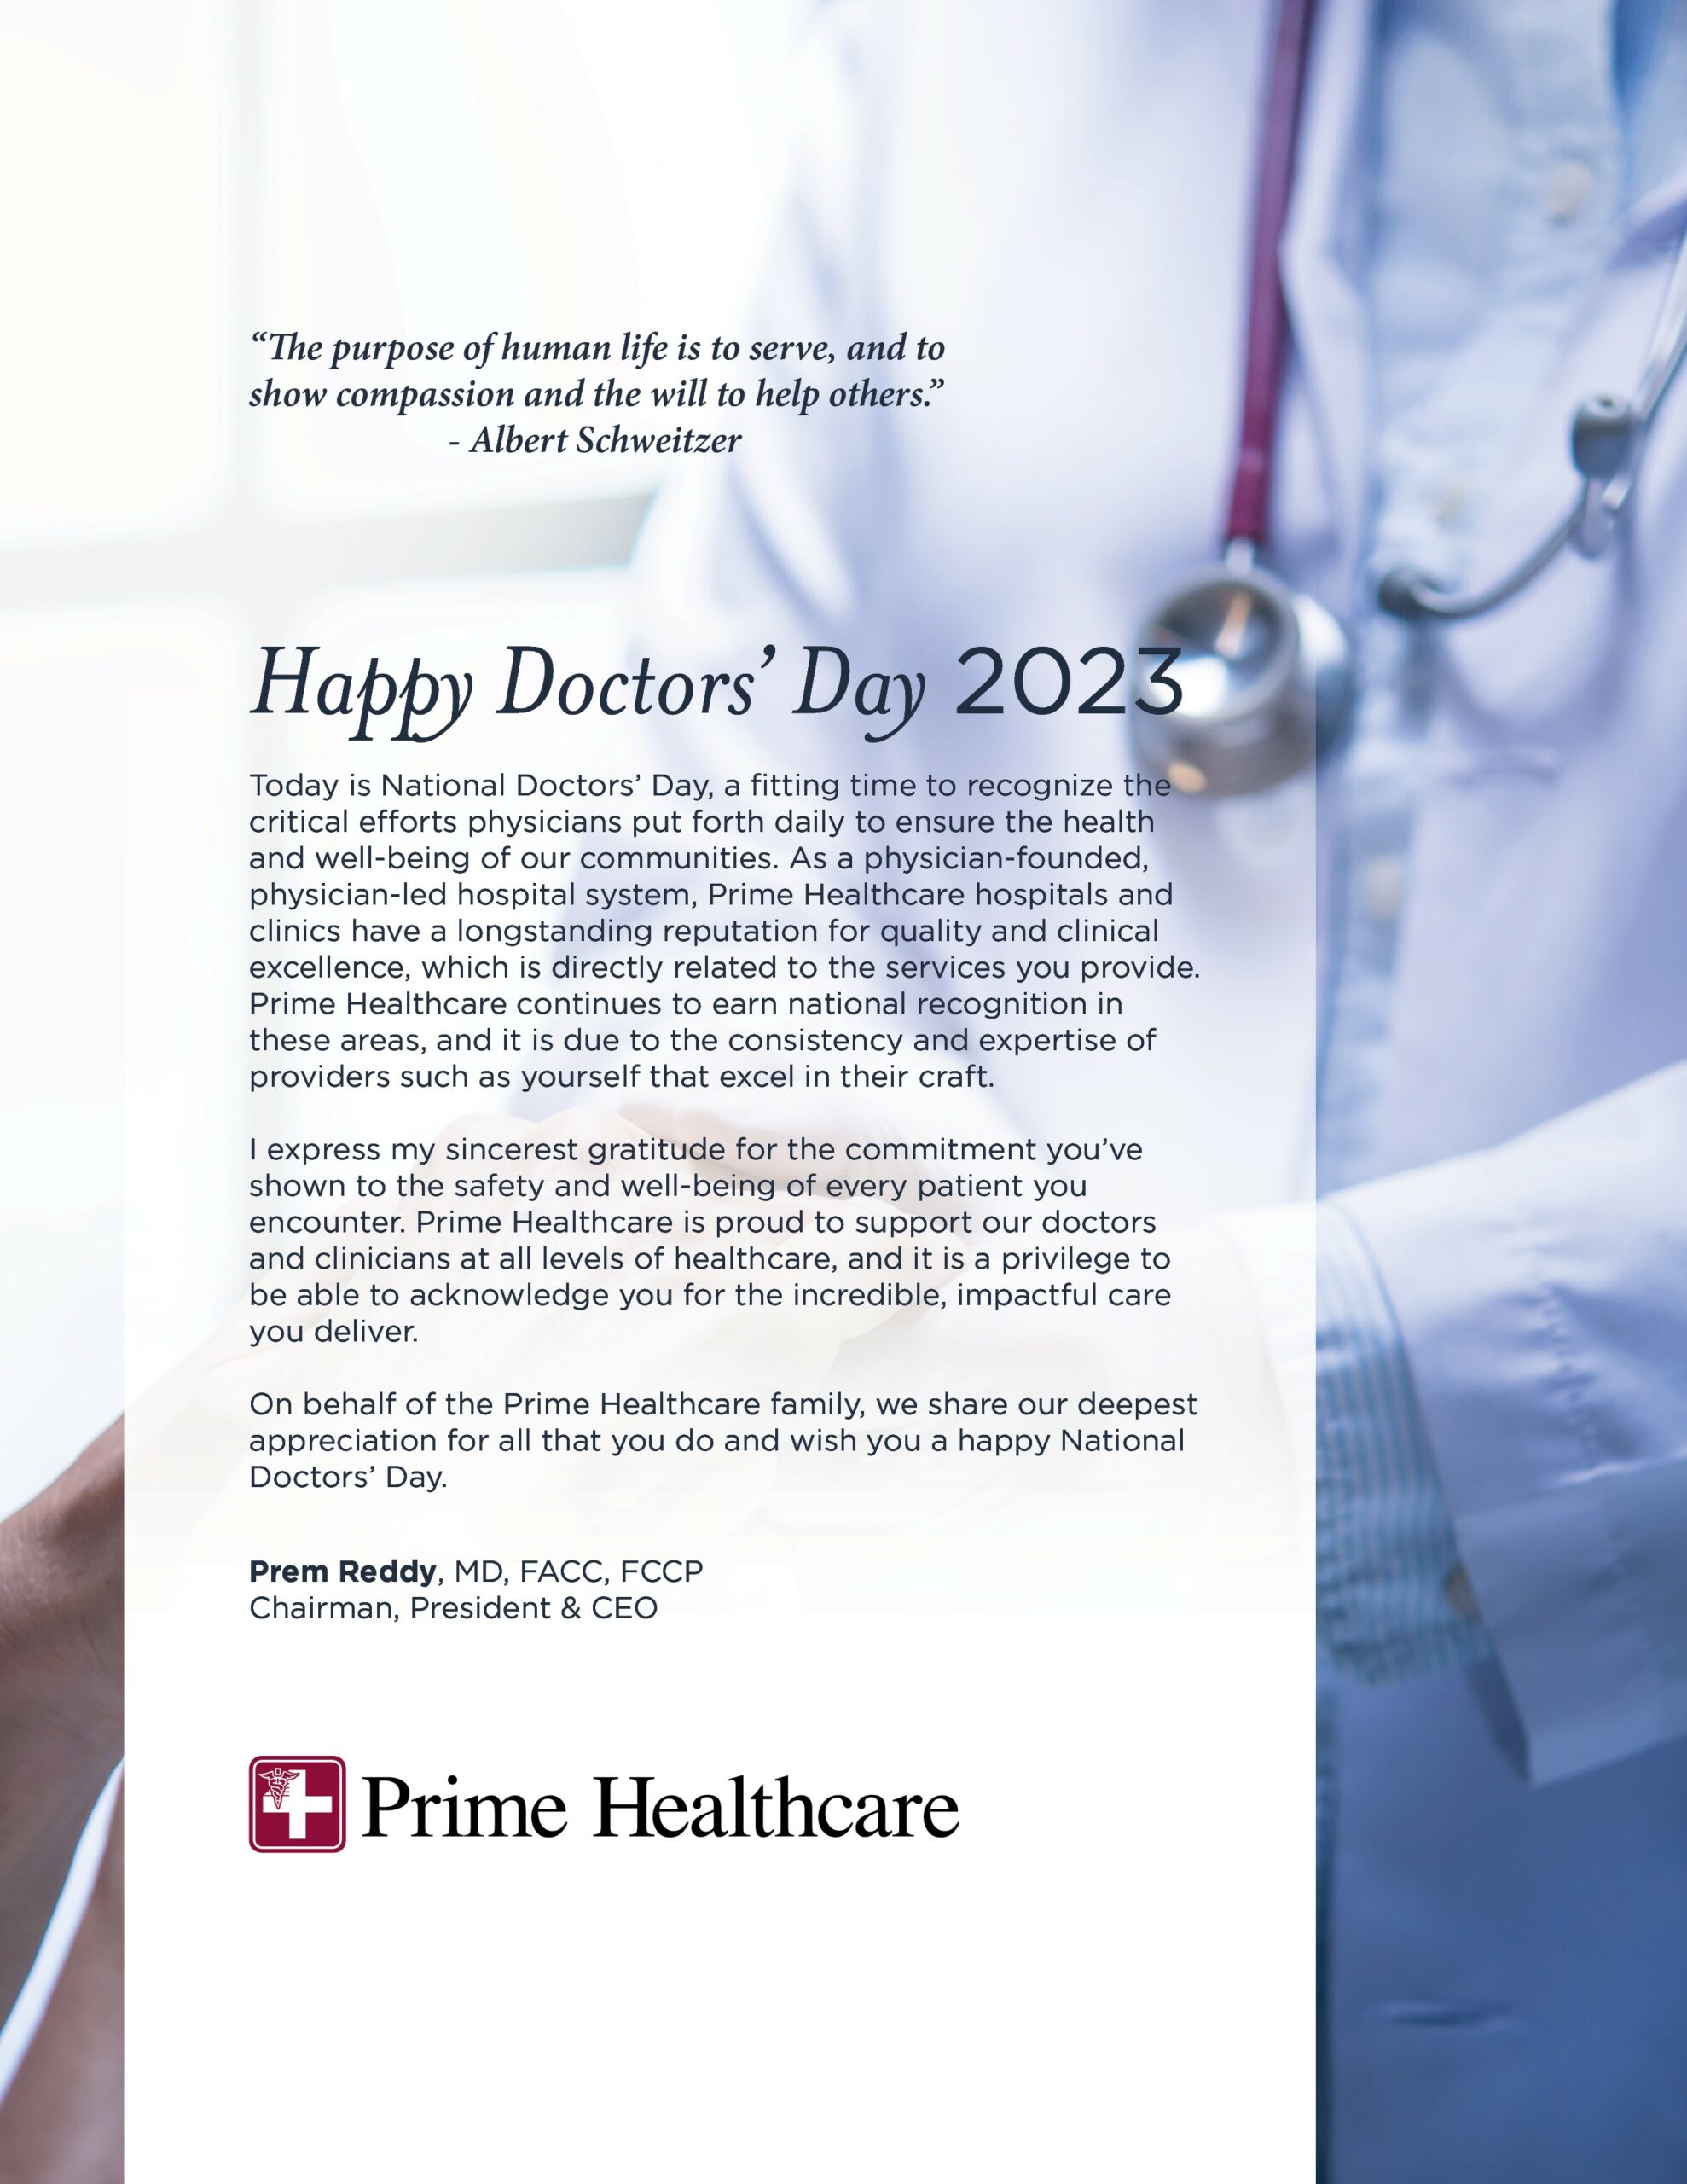 Prime Drs. Day thank you